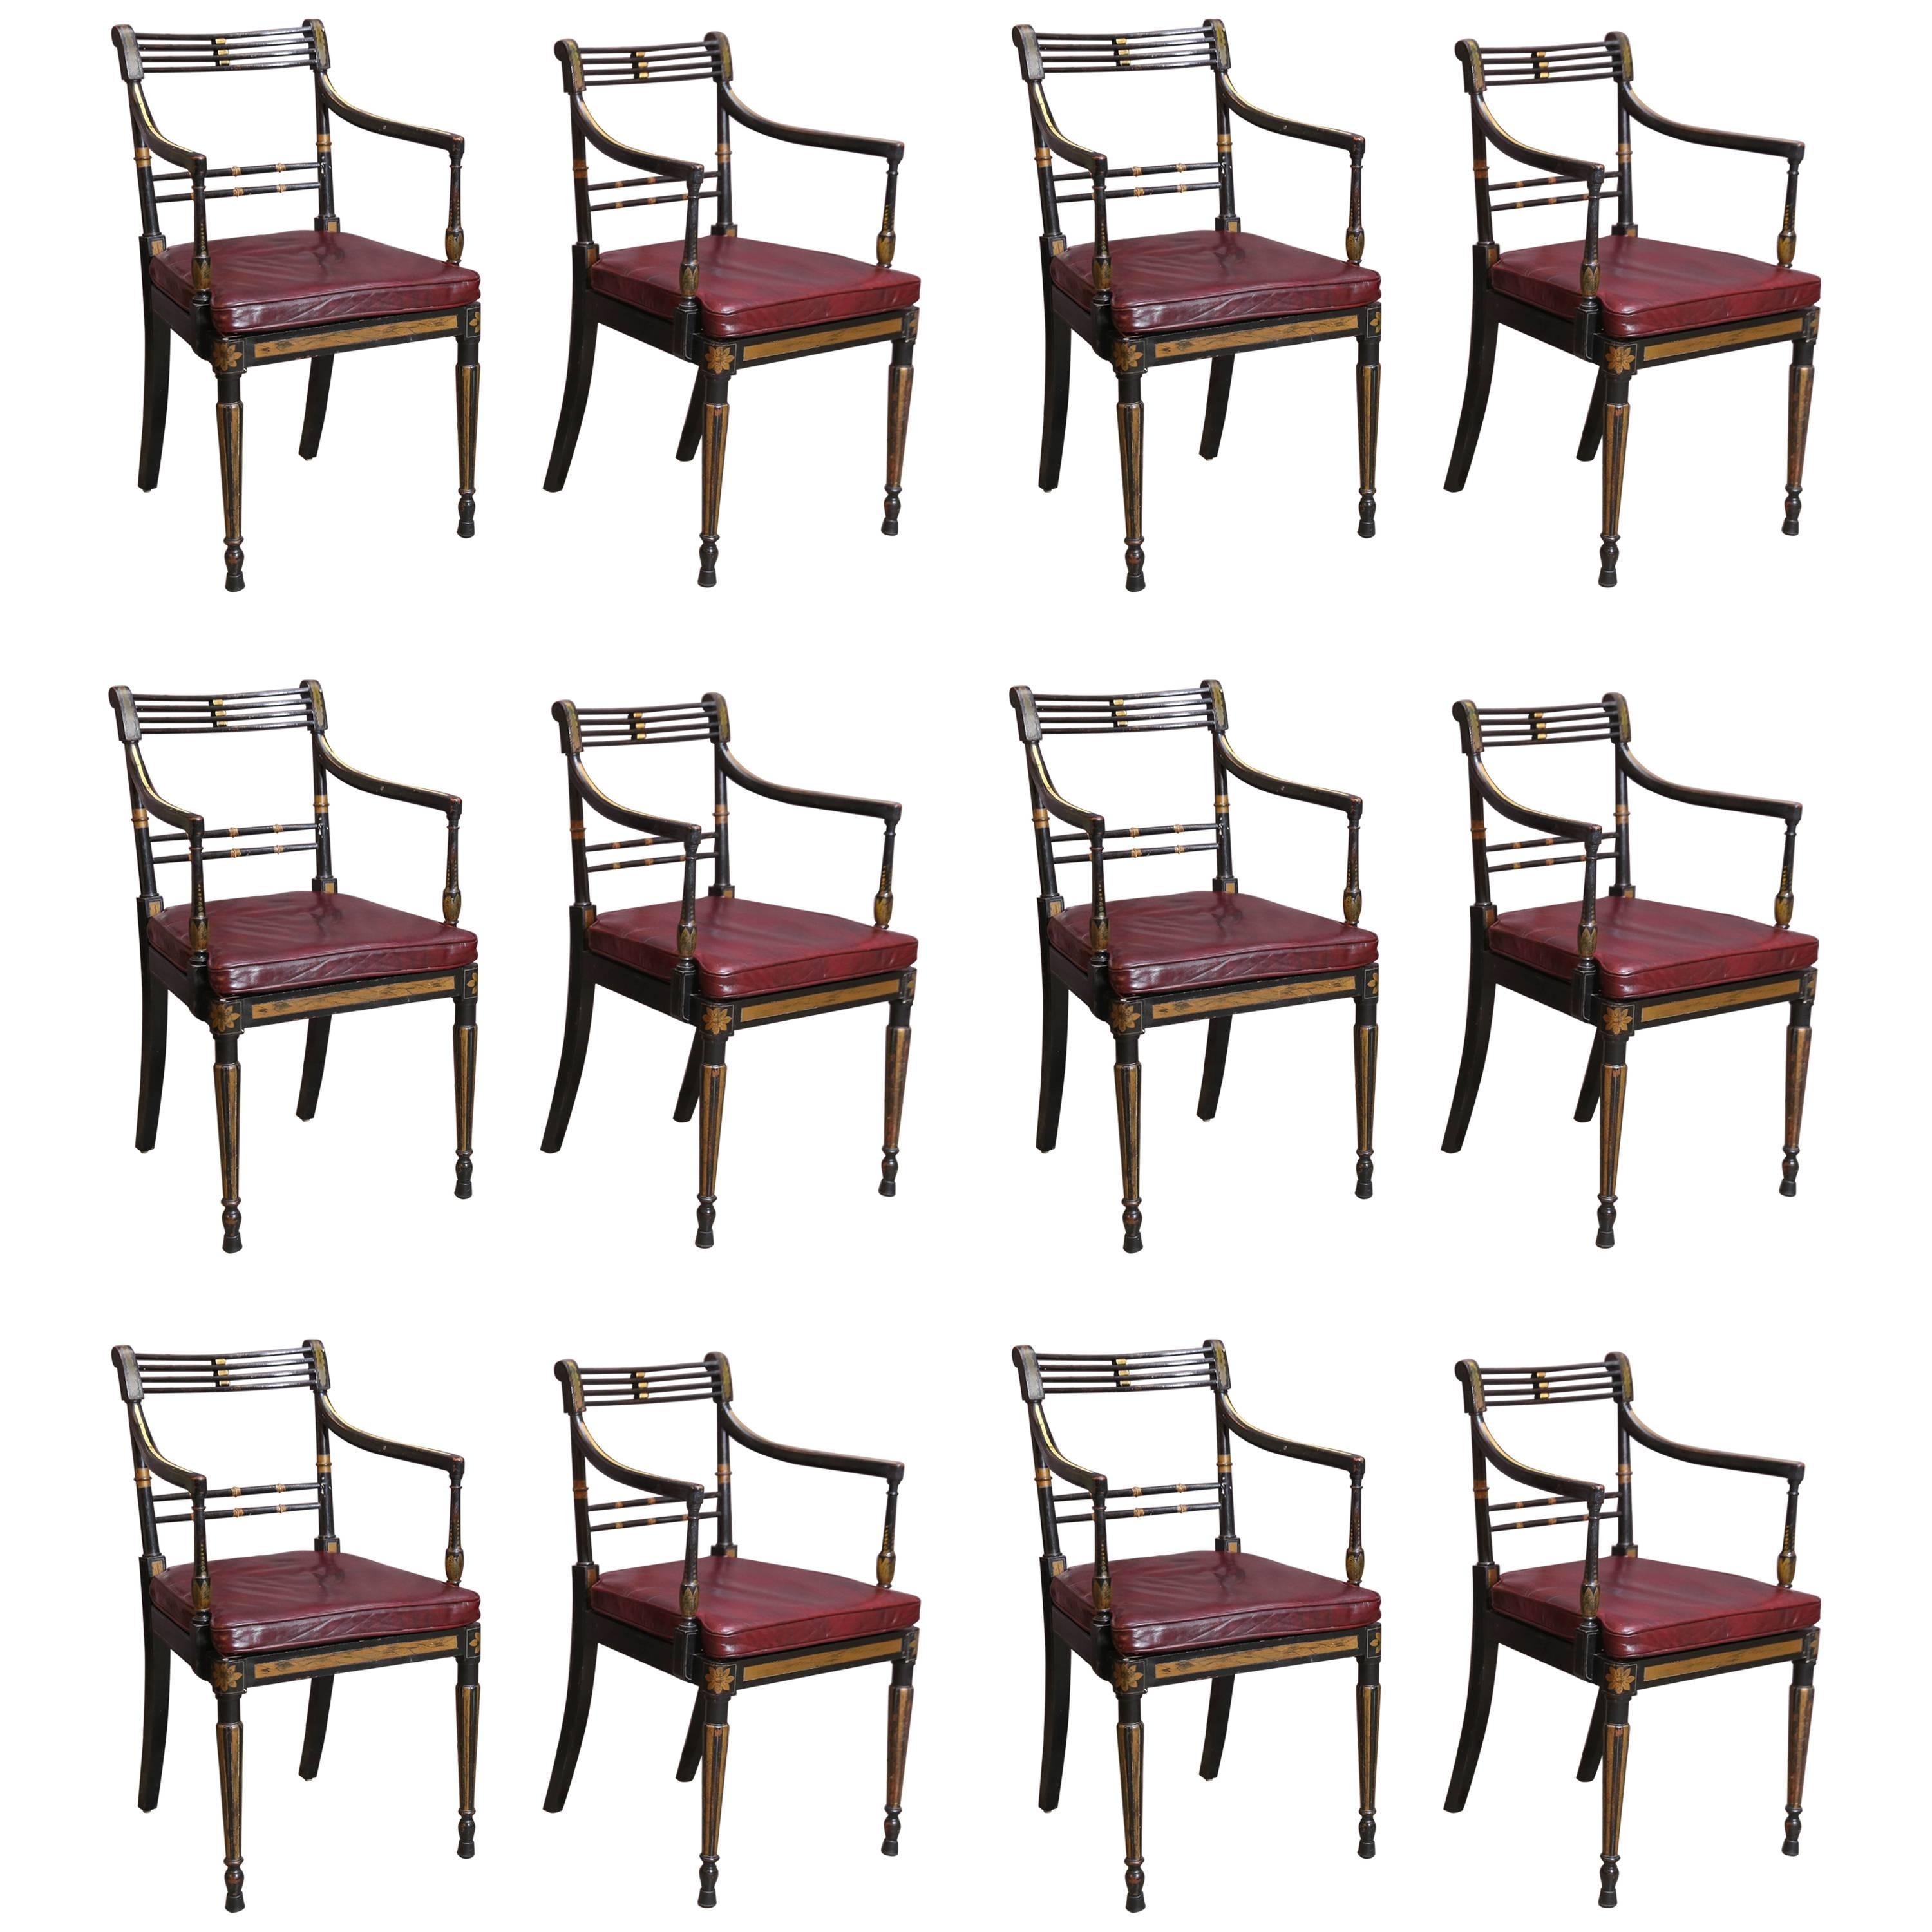 Set of 12 Period English Regency Armchairs for Dining